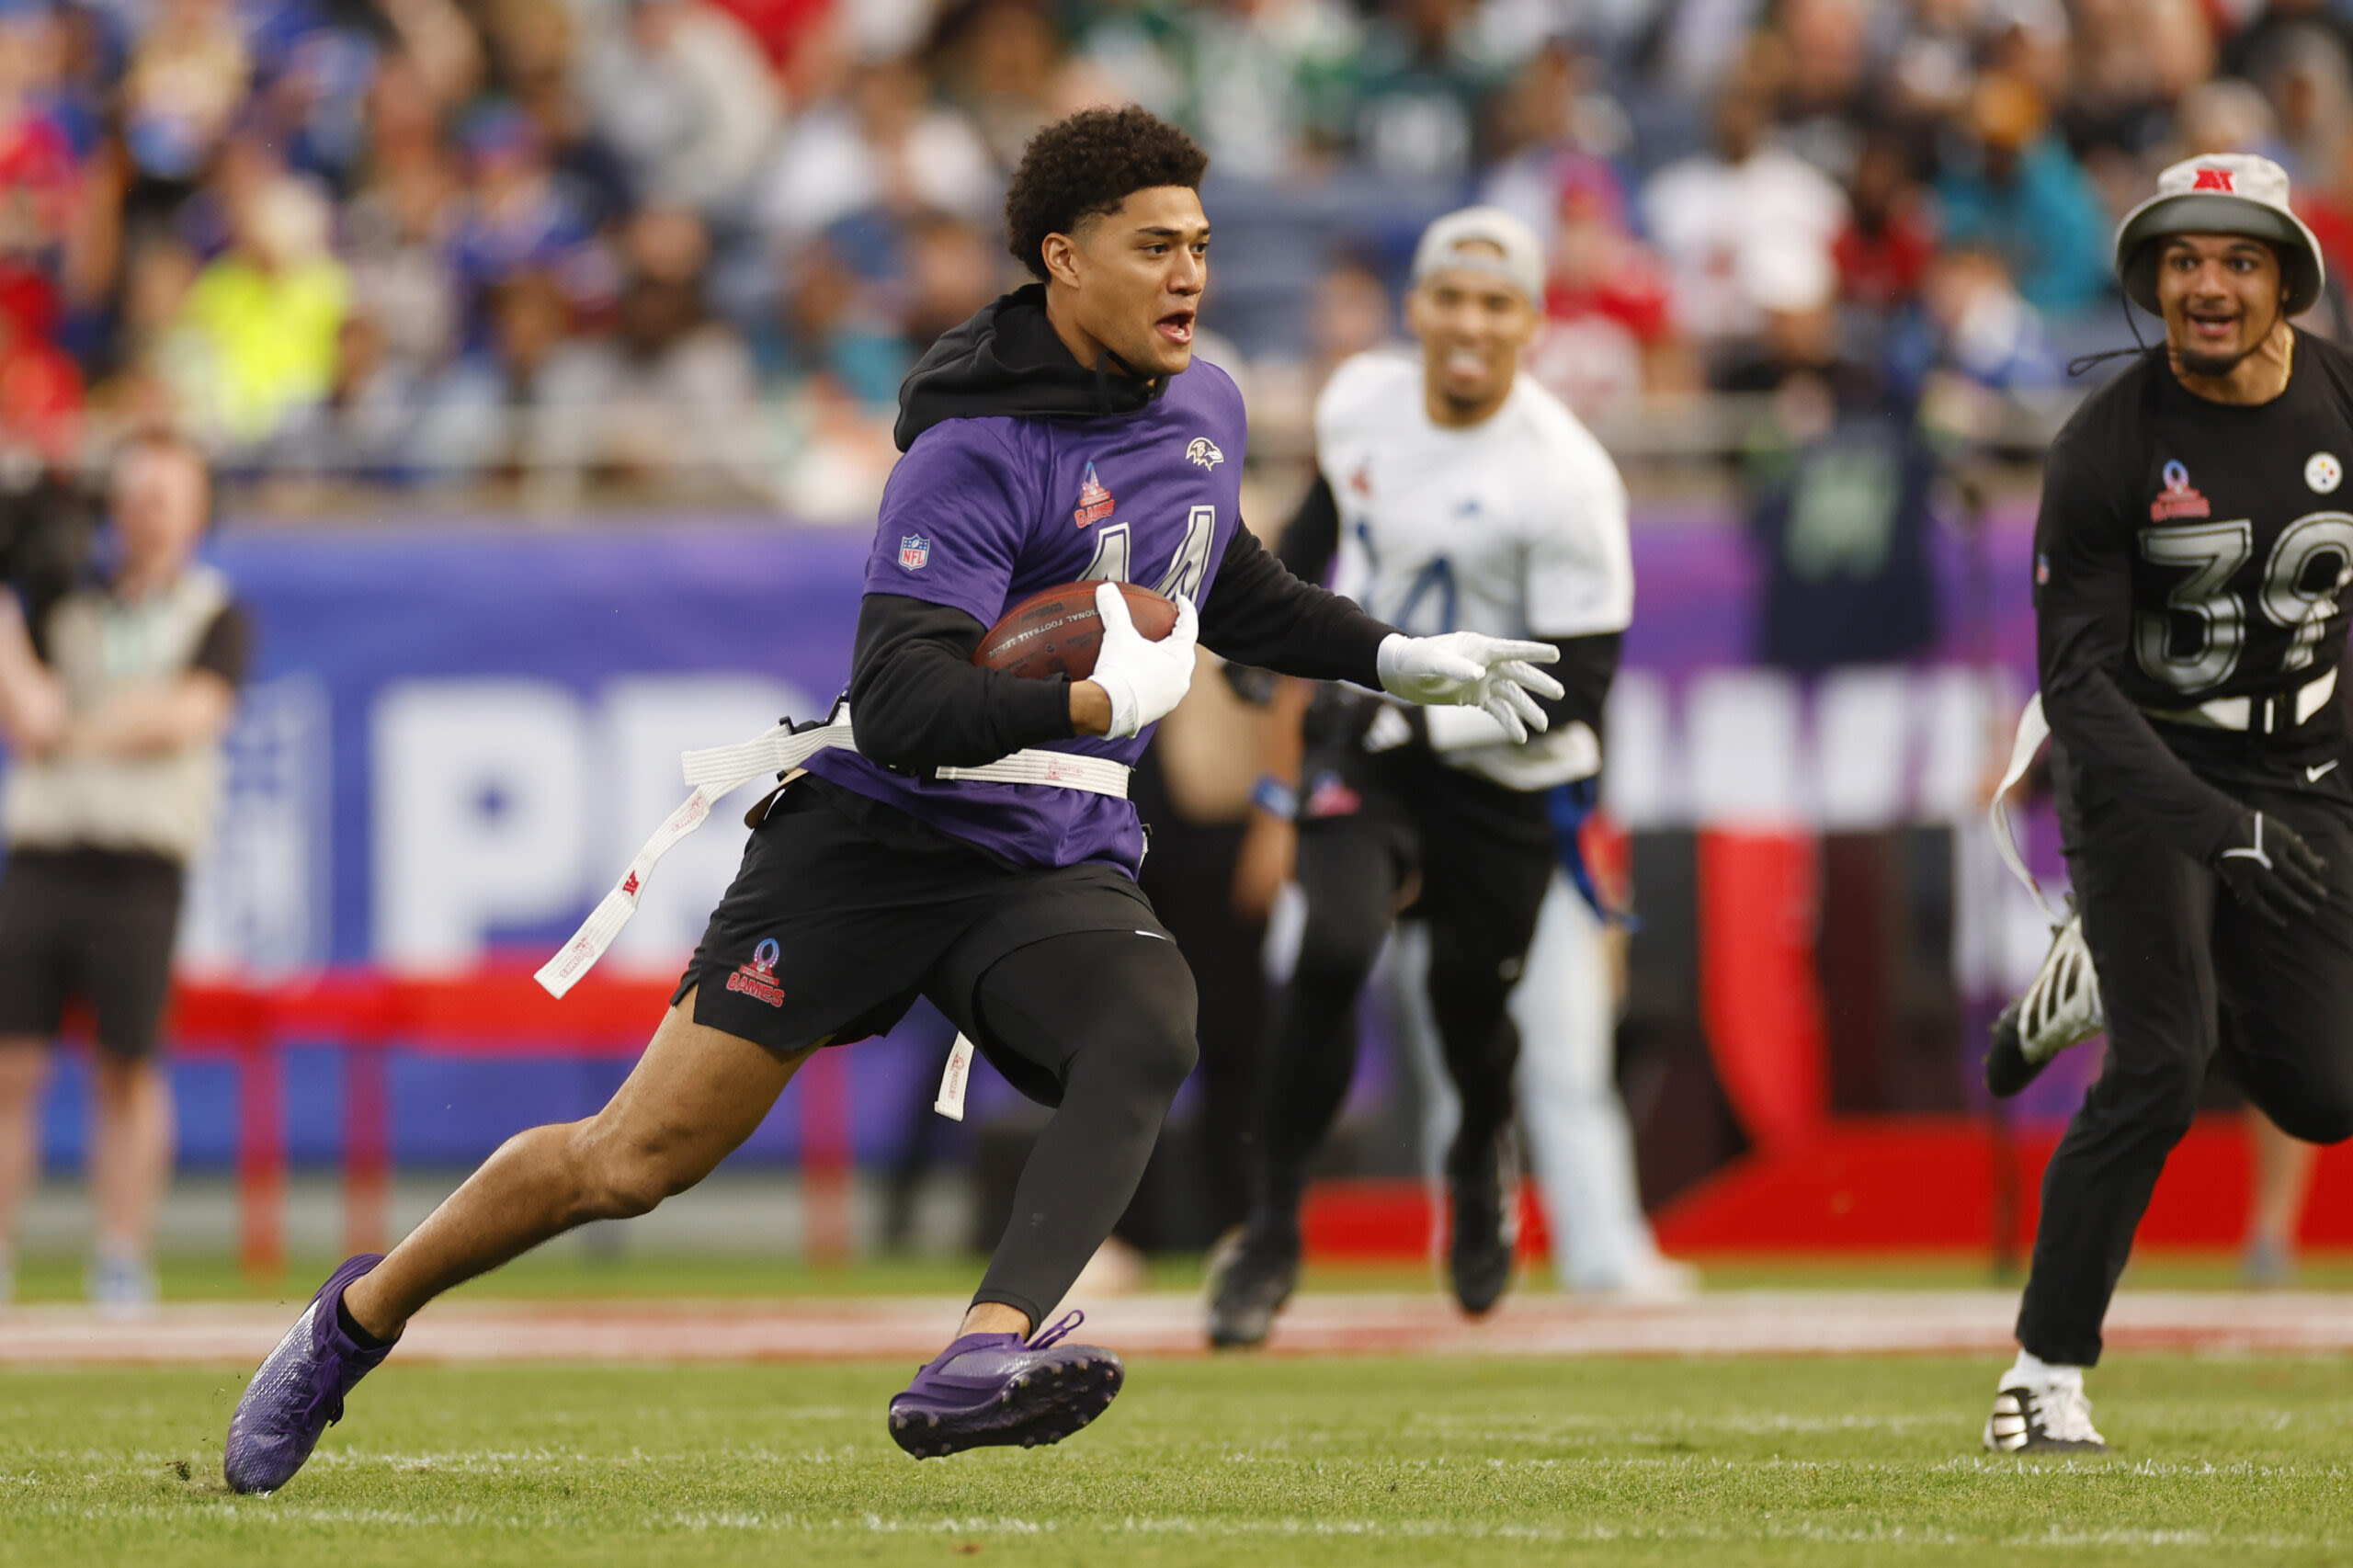 Ravens safety Kyle Hamilton is totally fine with becoming less famous